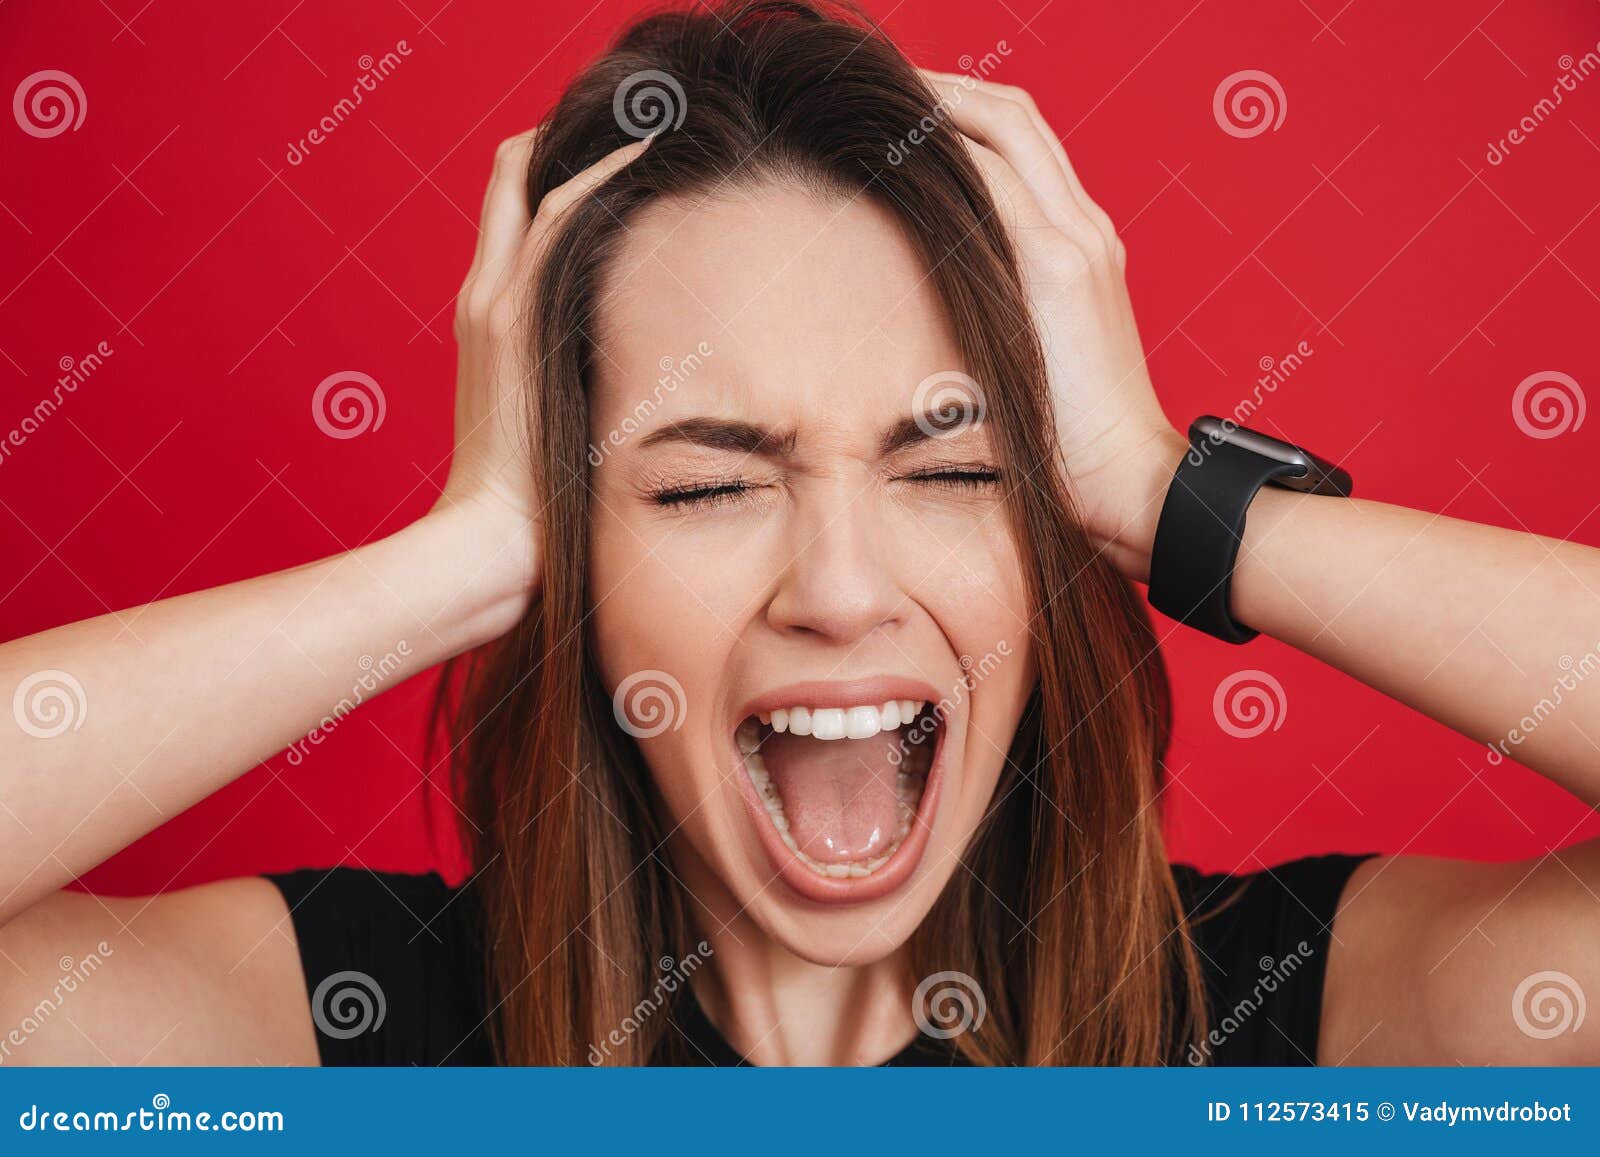 Photo Of Brunette Woman Emotionally Screaming And Grabbing Her H Stock Image Image Of Closeup